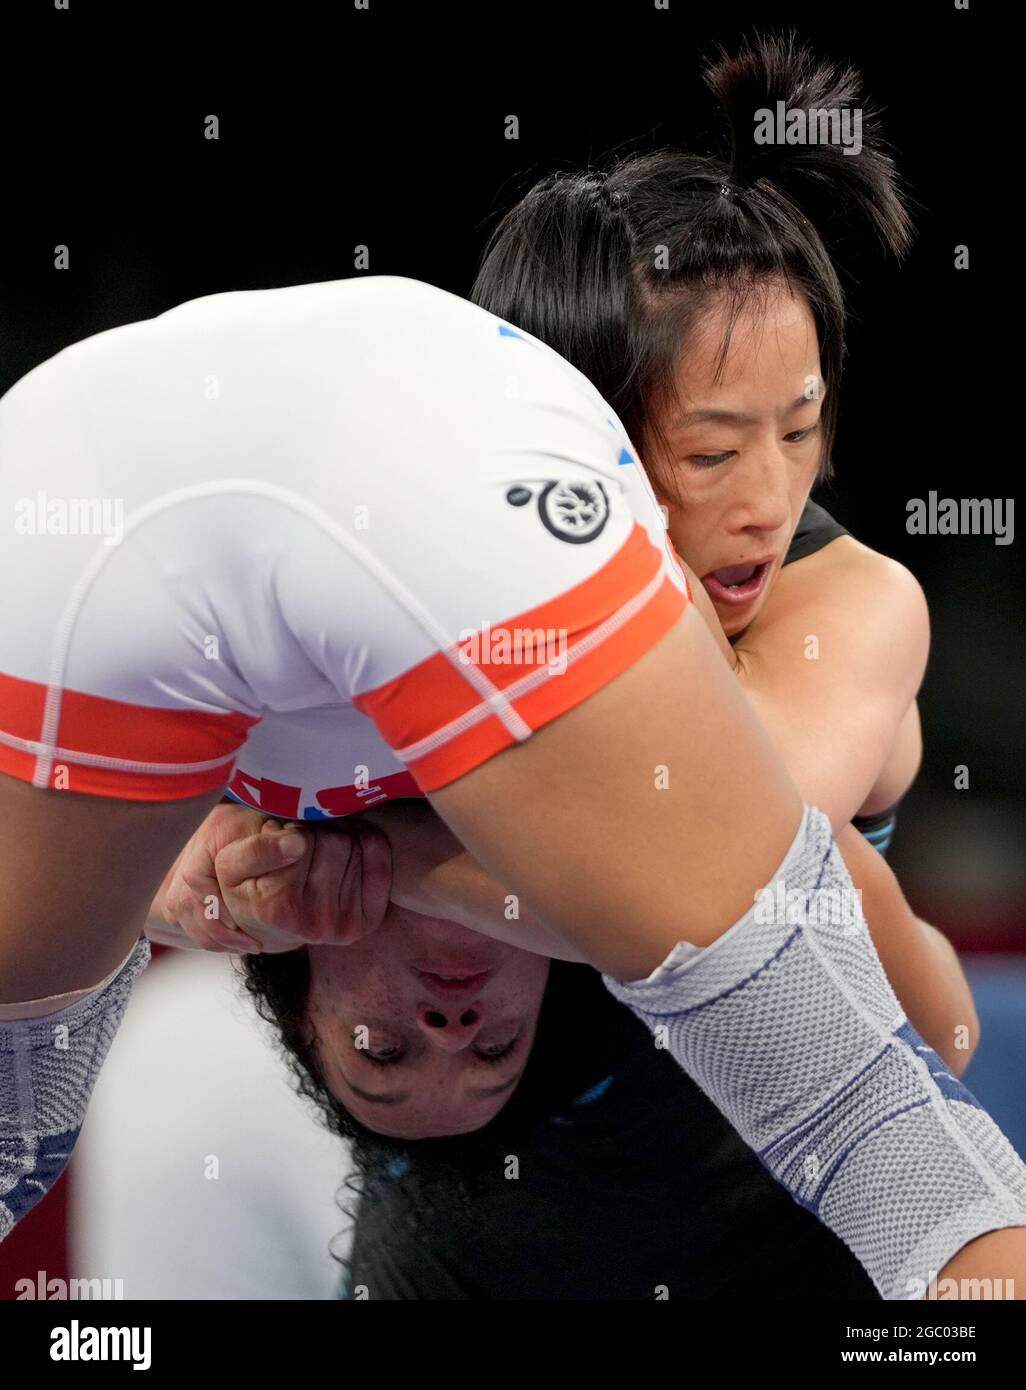 Chiba, Japan. 6th Aug, 2021. Sun Yanan (R) of China competes with Yusneylis Guzman Lopez of Cuba during the wrestling women's freestyle 50kg 1/8 final at the Tokyo 2020 Olympic Games in Chiba, Japan, Aug. 6, 2021. Credit: Wang Yuguo/Xinhua/Alamy Live News Stock Photo